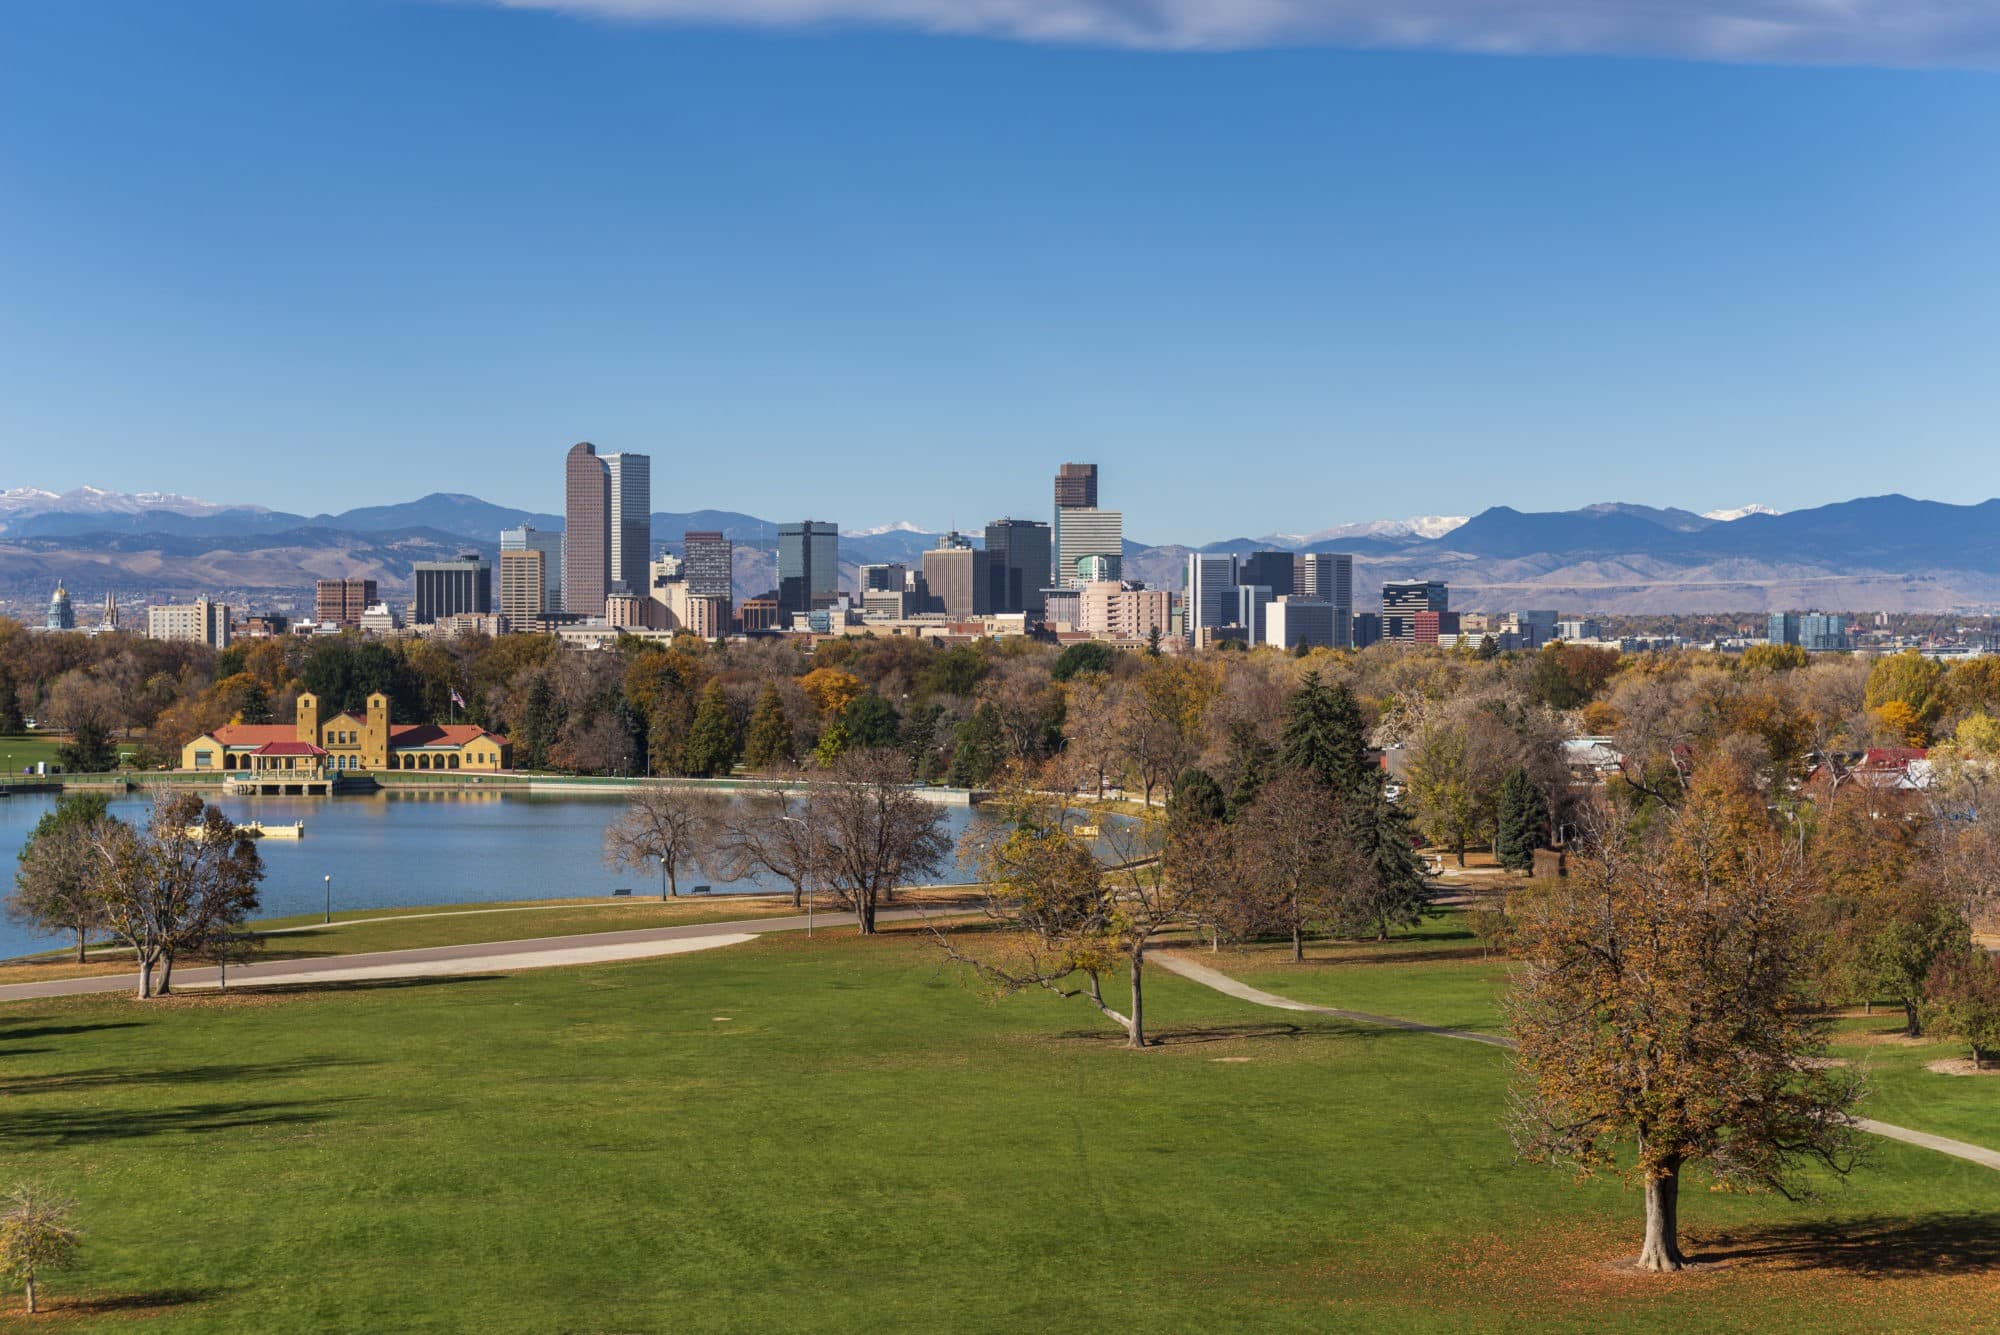 Scene of Denver skyline with park in the foreground